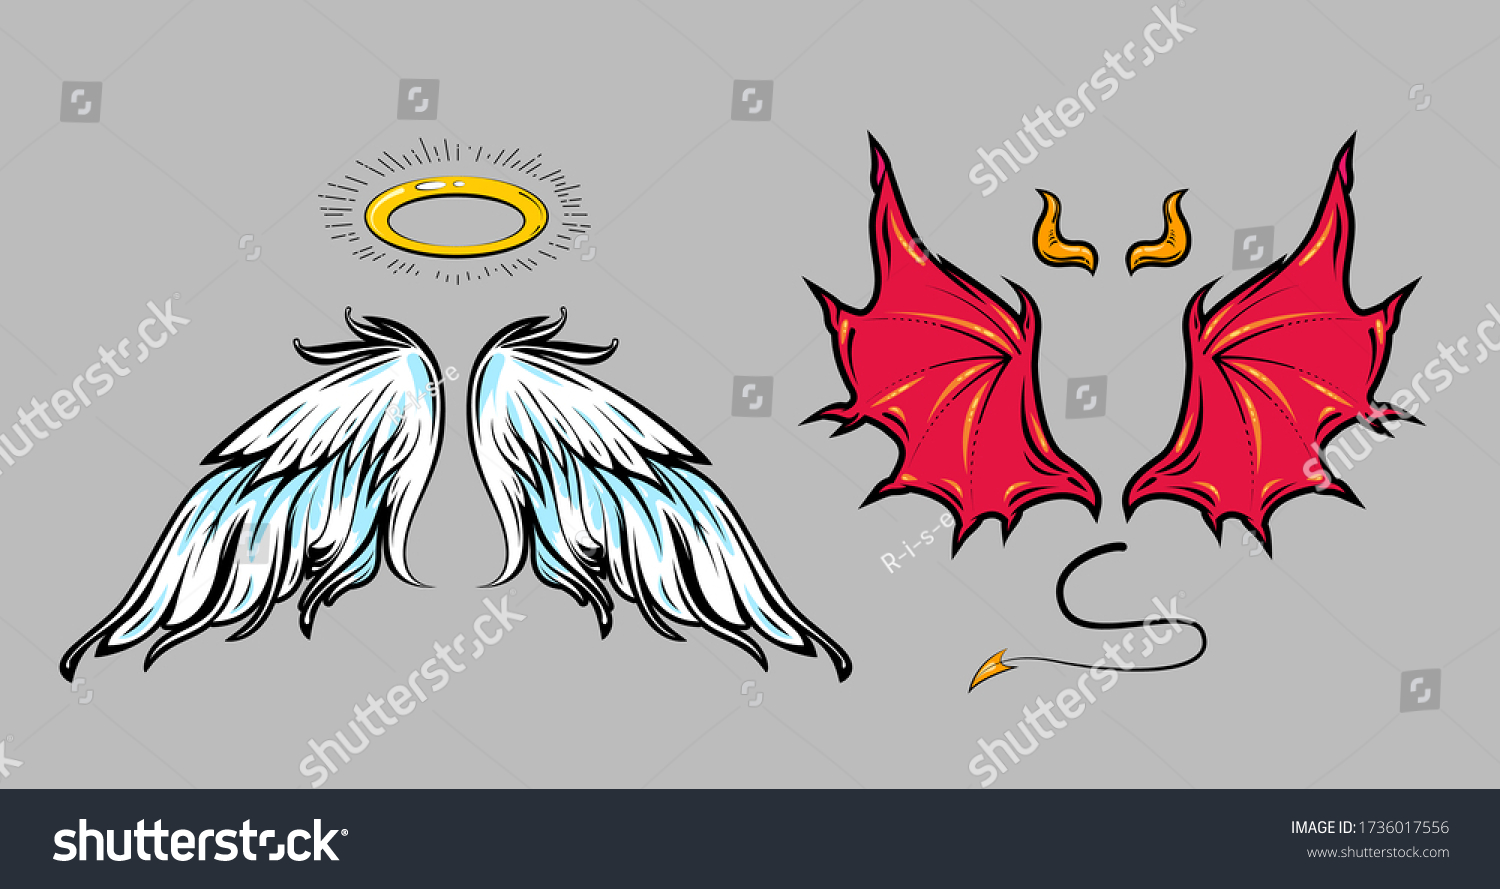 SVG of Angel and demon cartoon comic style attribute elements. Vector art of halo, wings, horns, tail. Good and bad concept illustration. Isolated on gray background svg